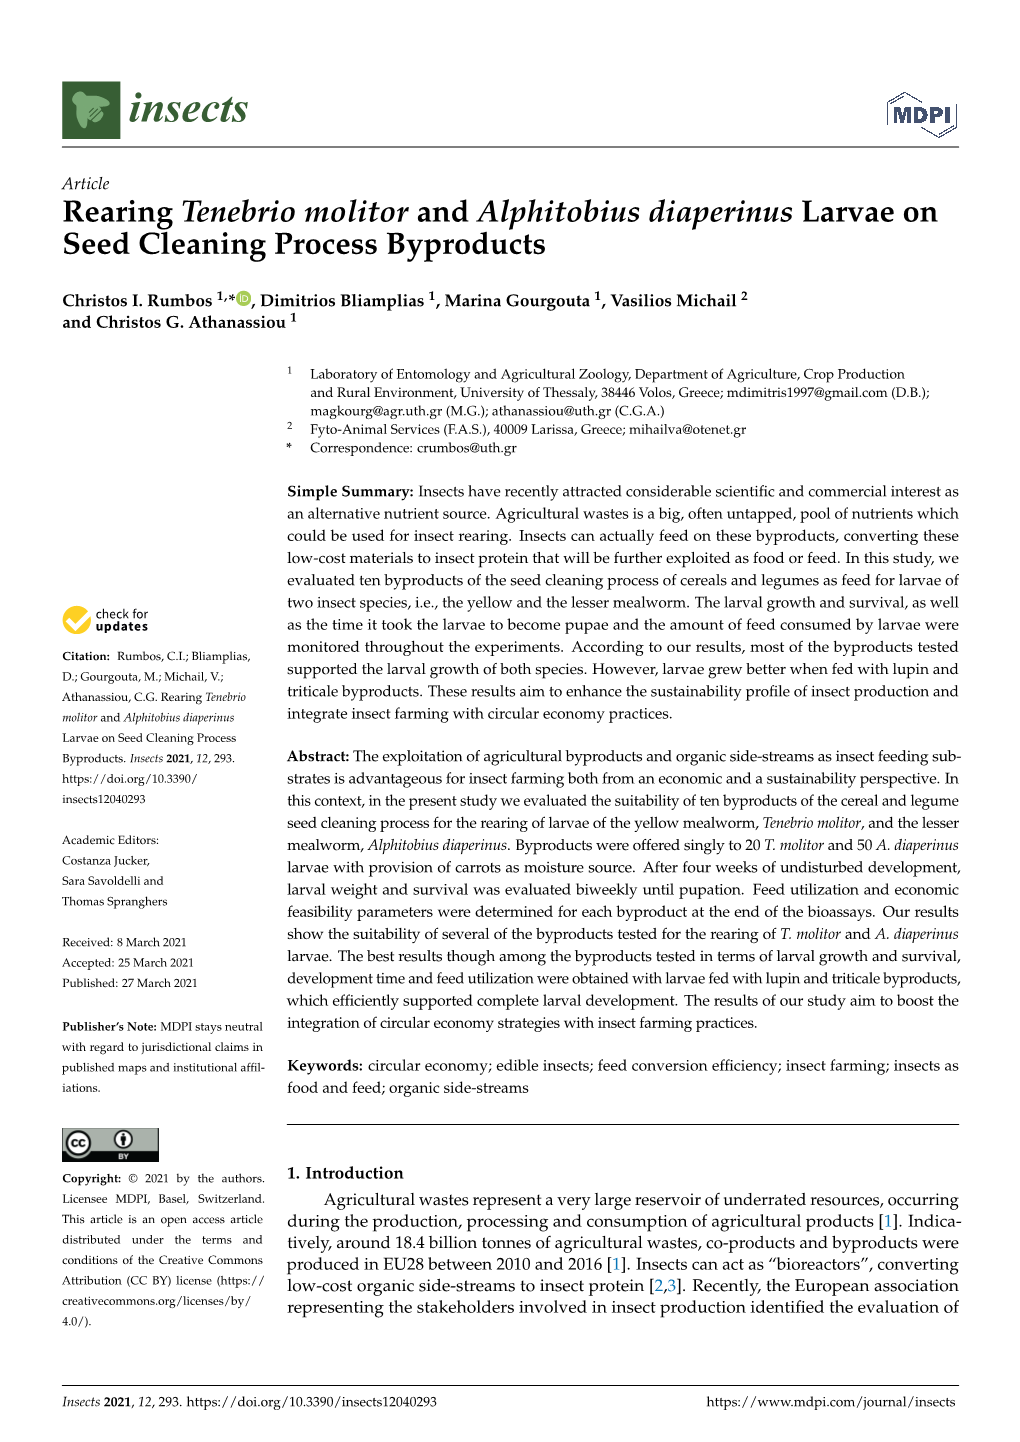 Rearing Tenebrio Molitor and Alphitobius Diaperinus Larvae on Seed Cleaning Process Byproducts